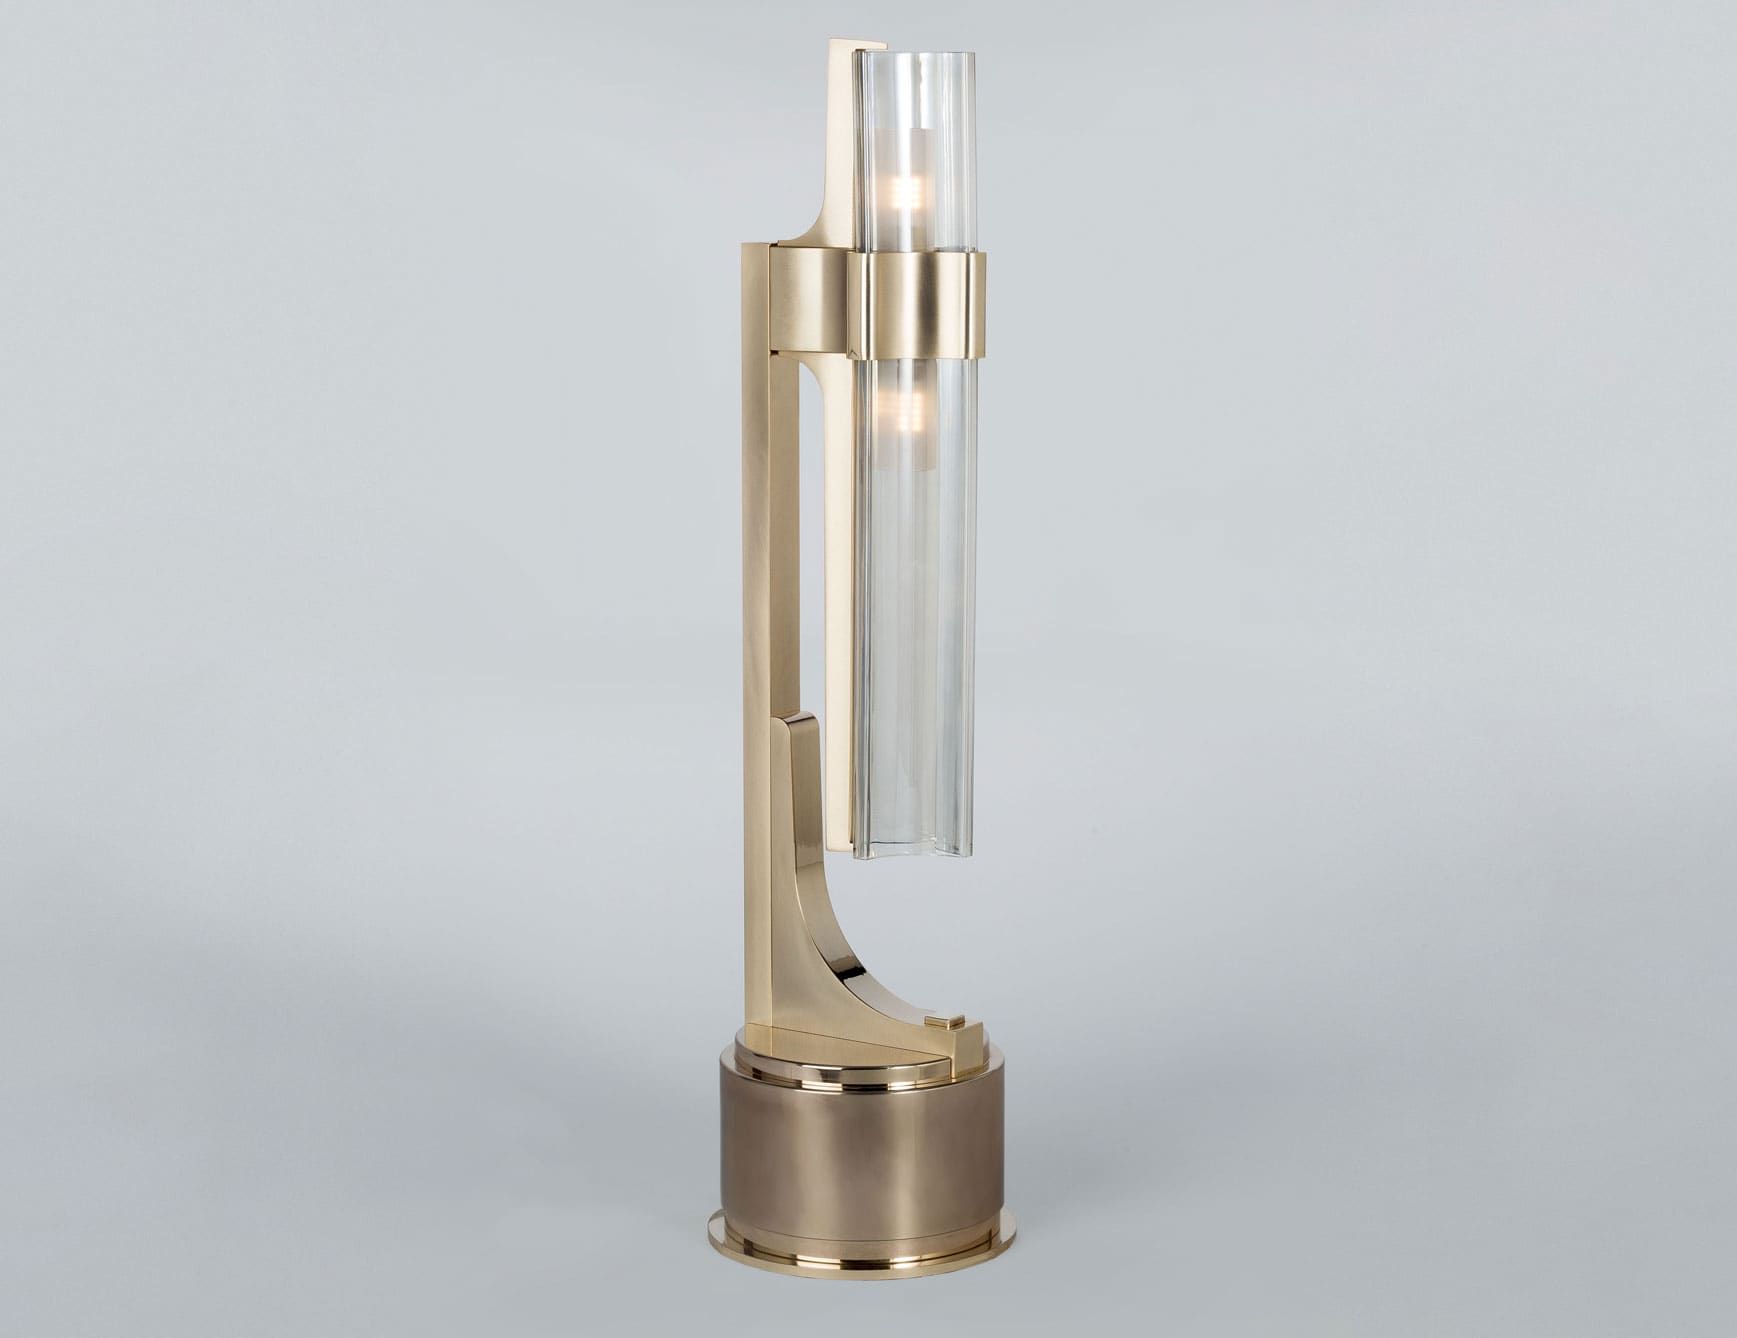 Eterea modern Italian table lamp with transparent glass